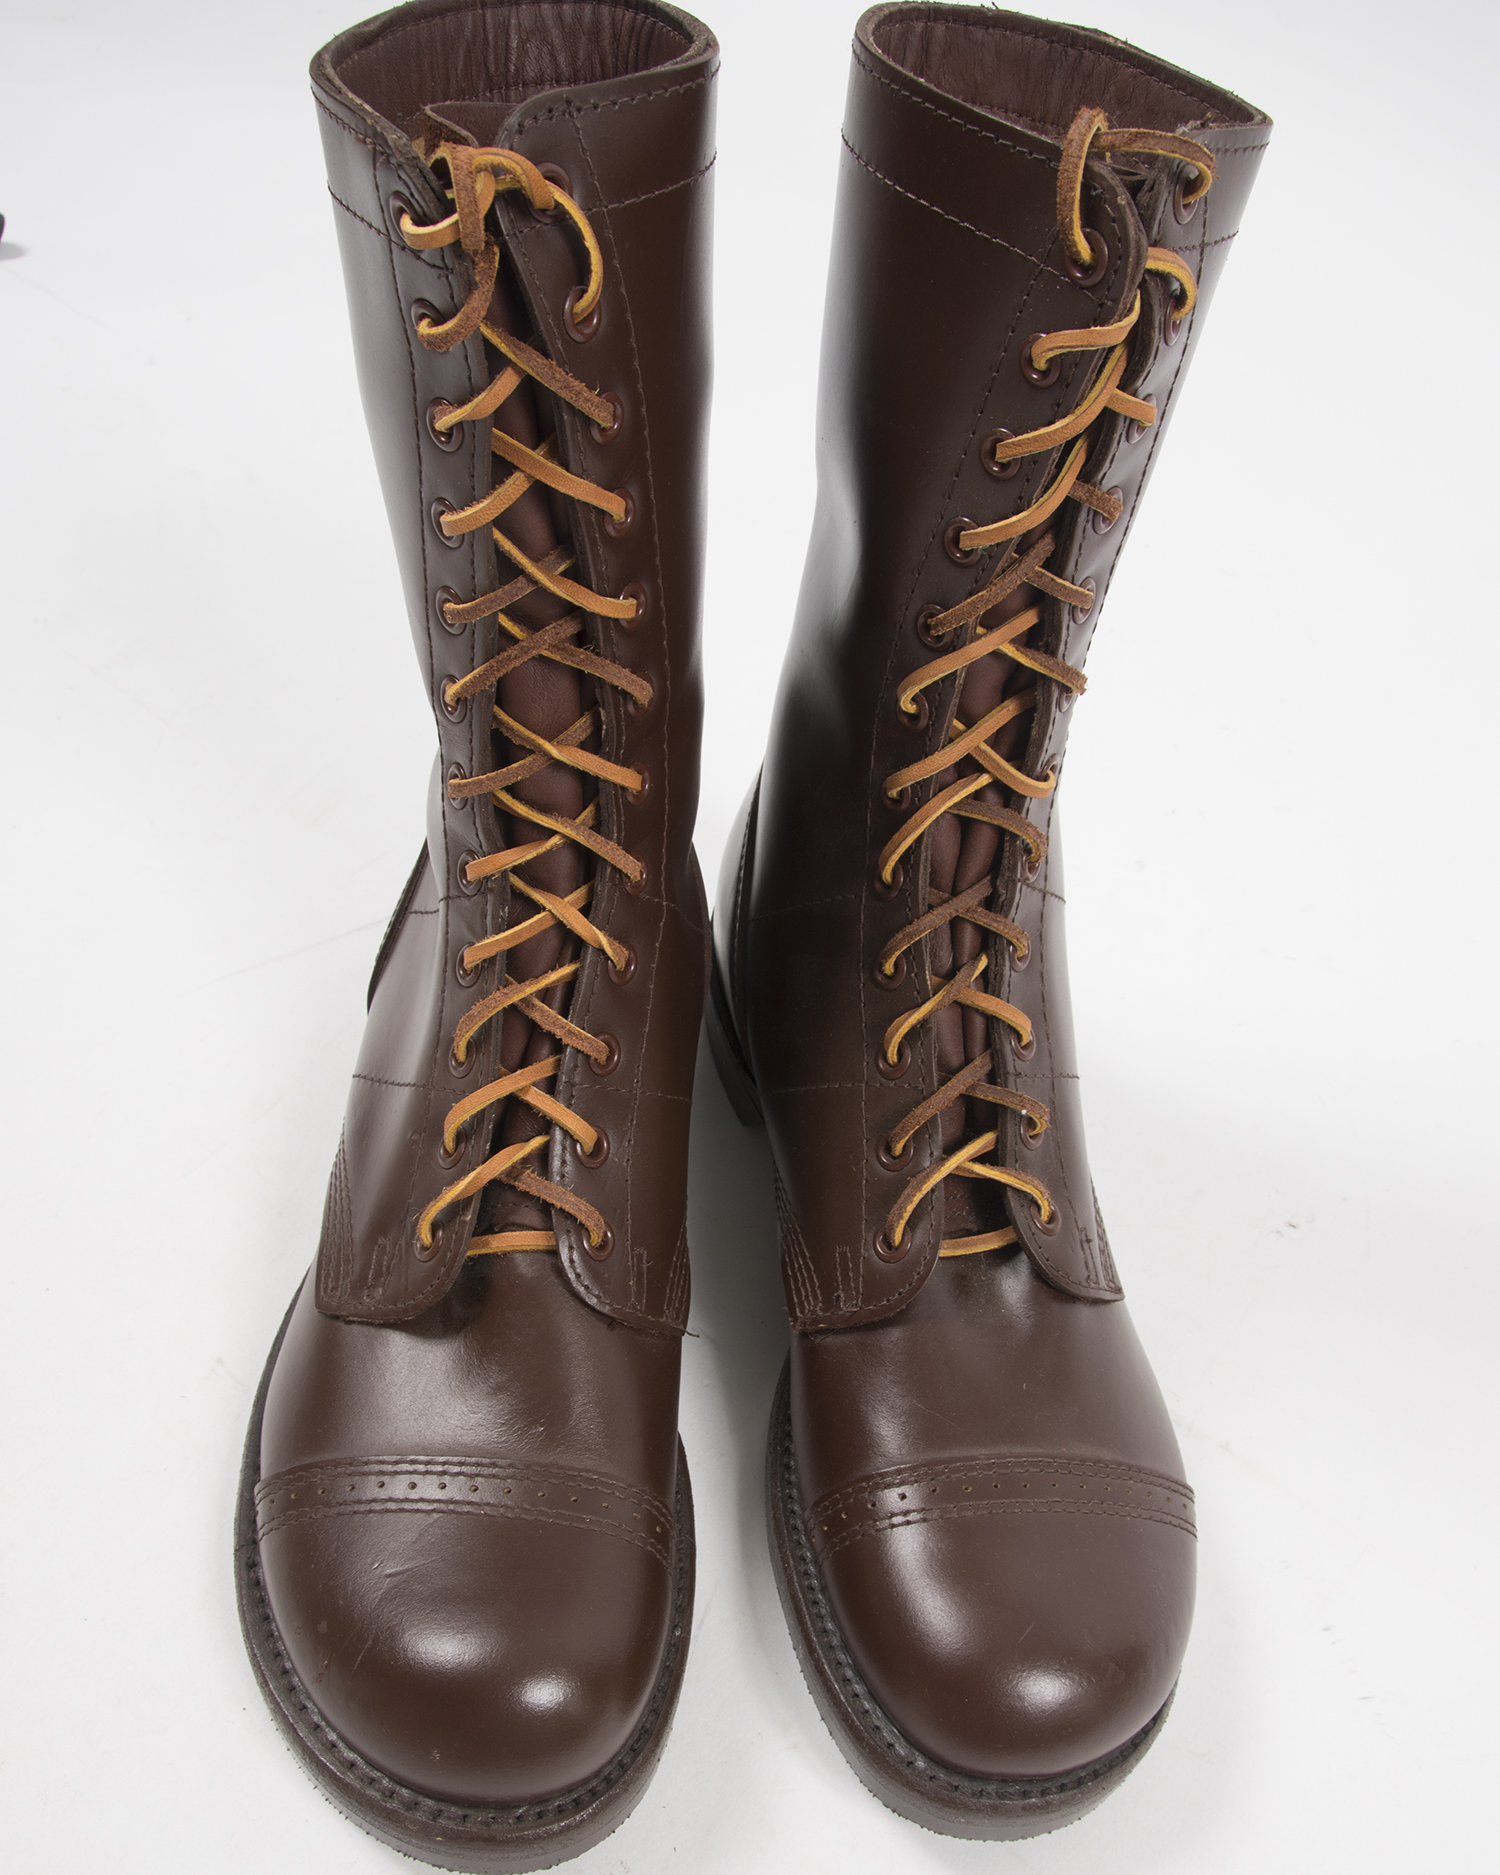 101st Airborne Jump Boots | vlr.eng.br